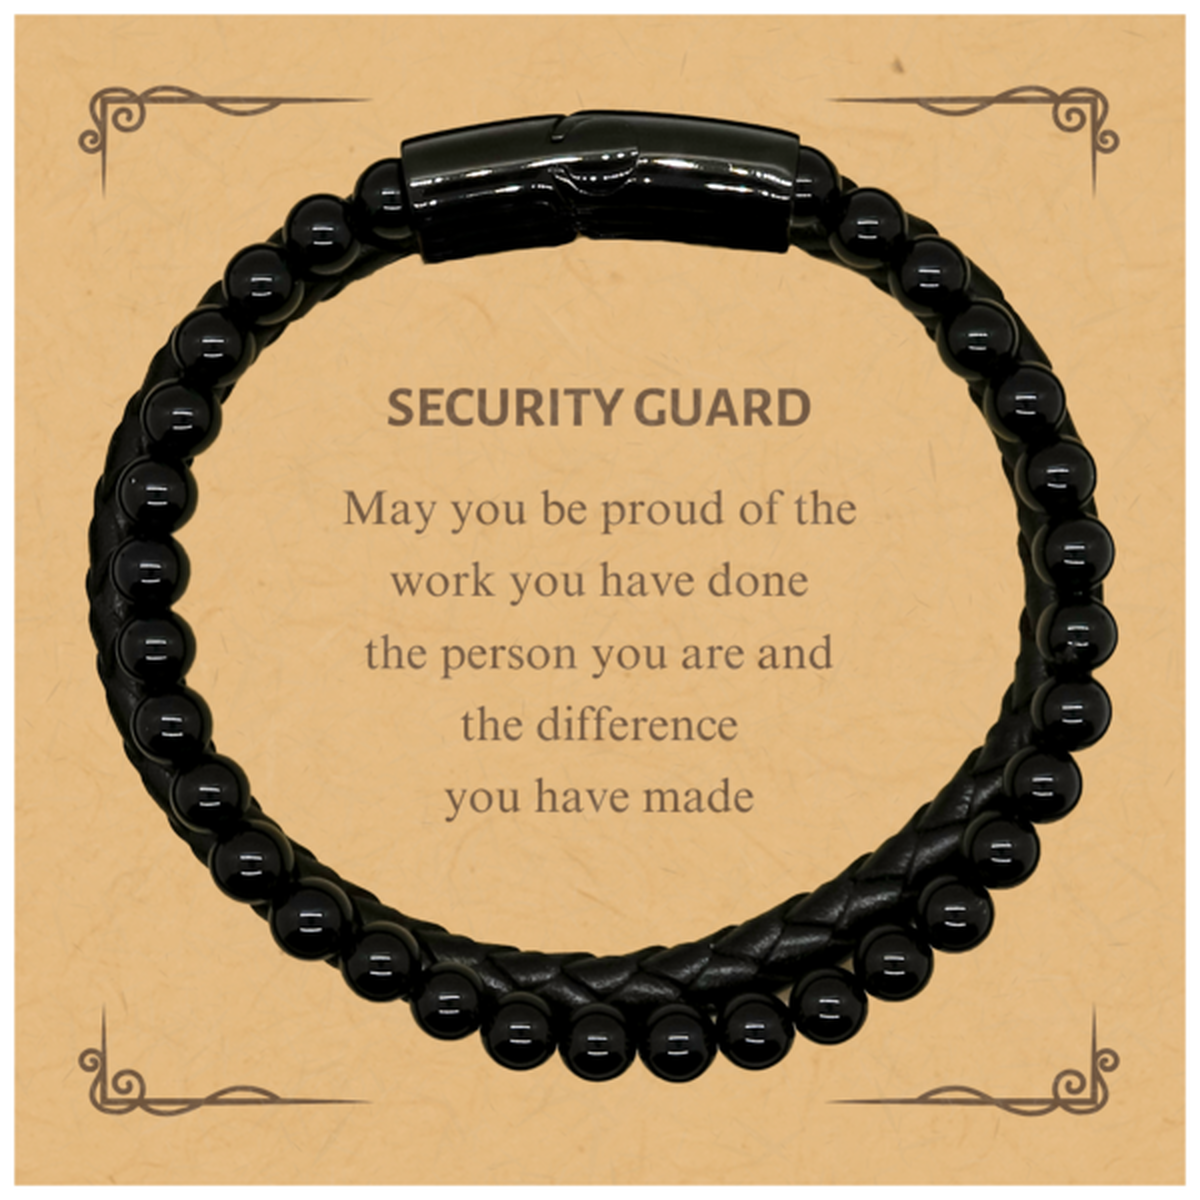 Security Guard May you be proud of the work you have done, Retirement Security Guard Stone Leather Bracelets for Colleague Appreciation Gifts Amazing for Security Guard